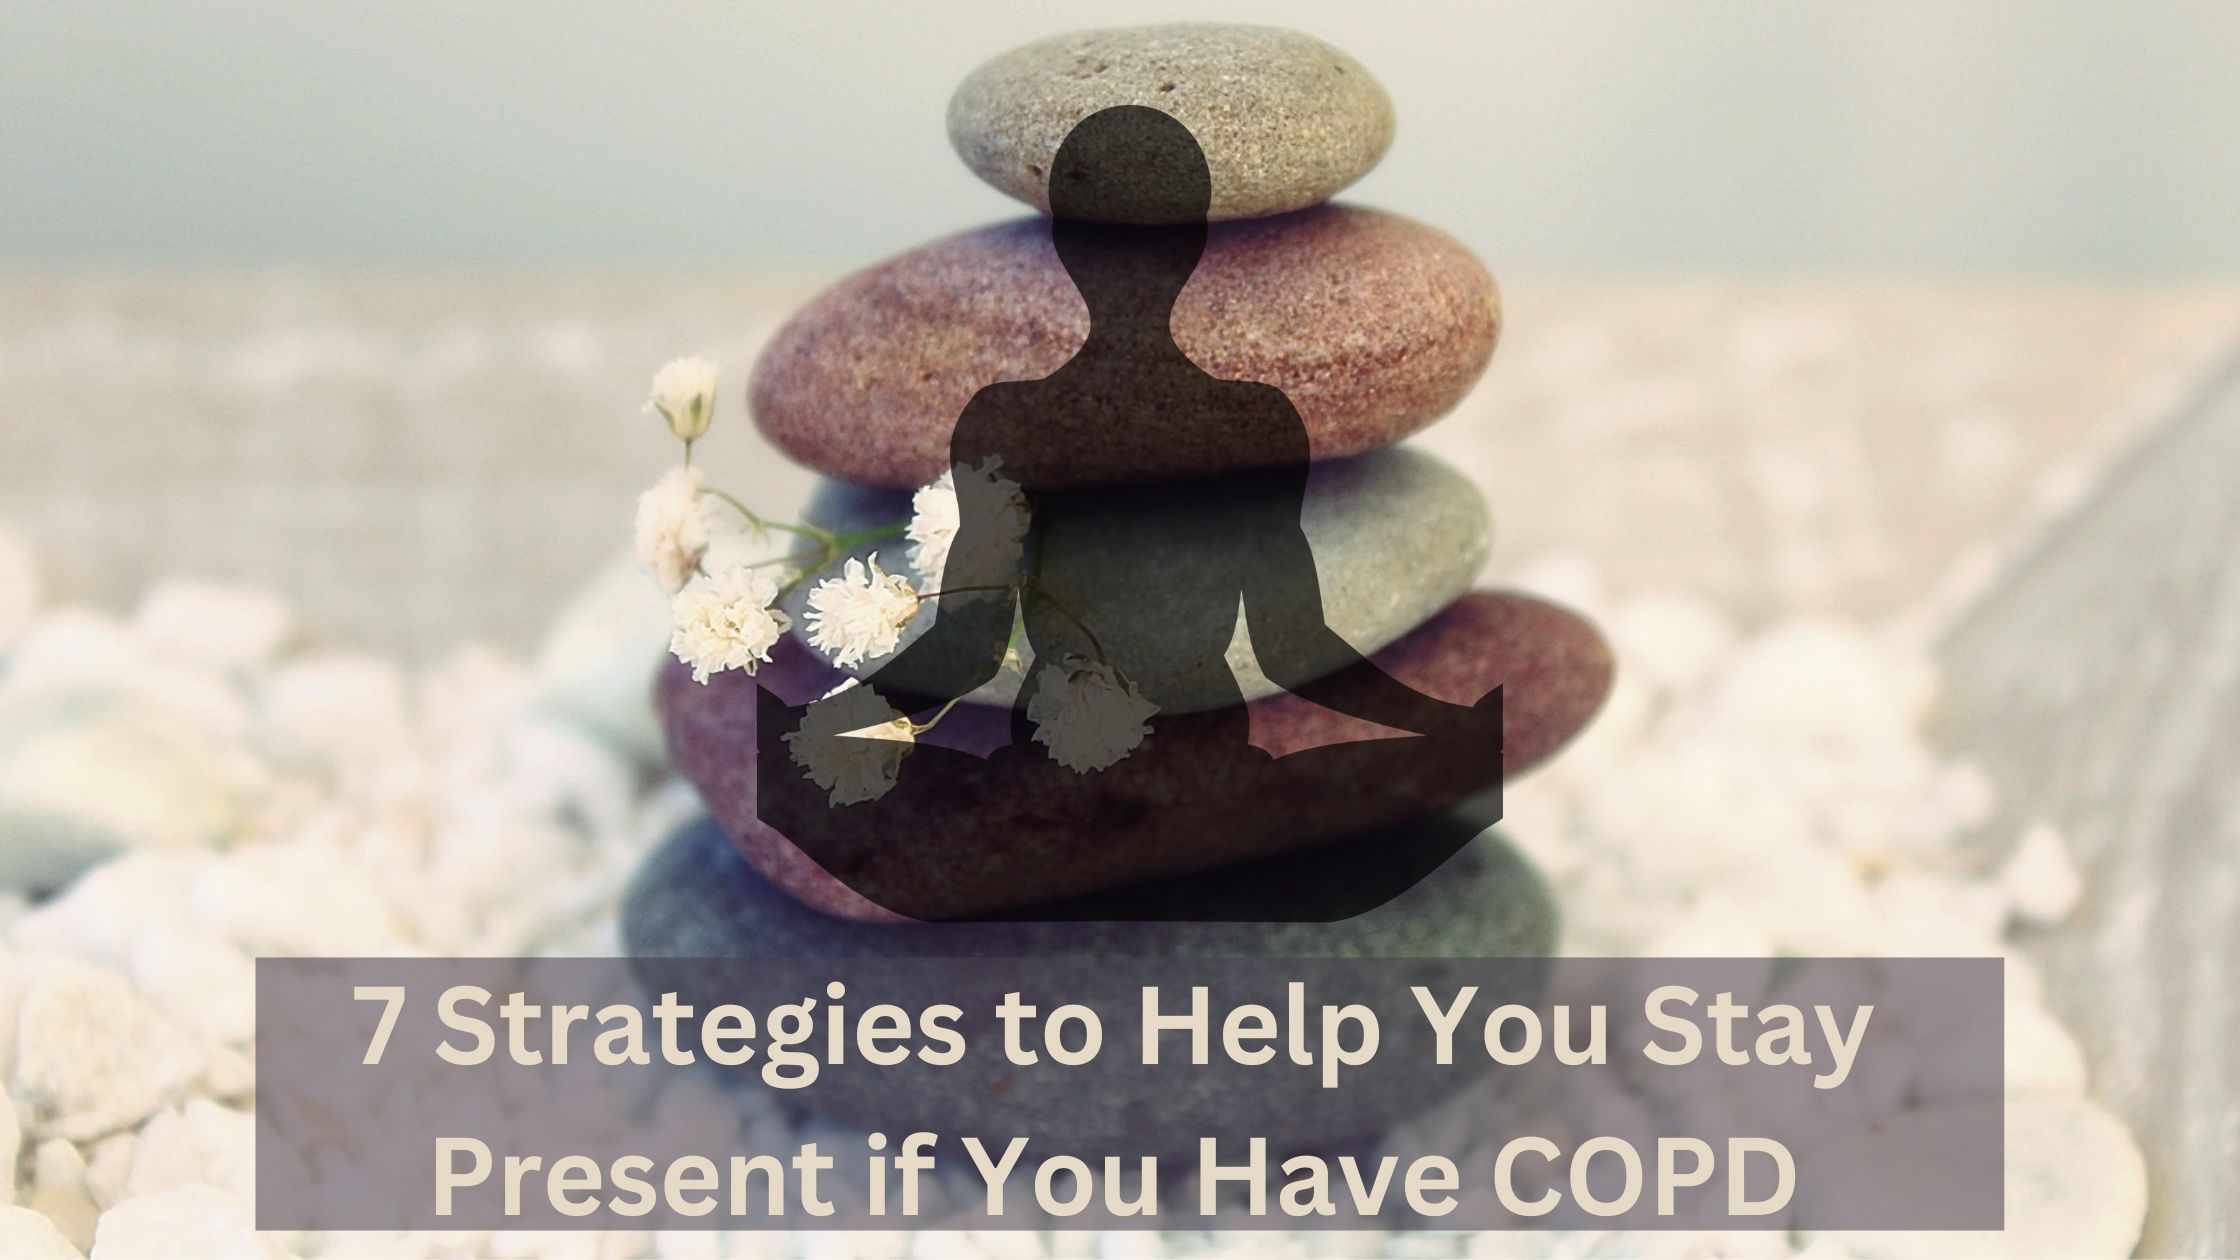 7 Strategies to Help You Stay Present if You Have COPD